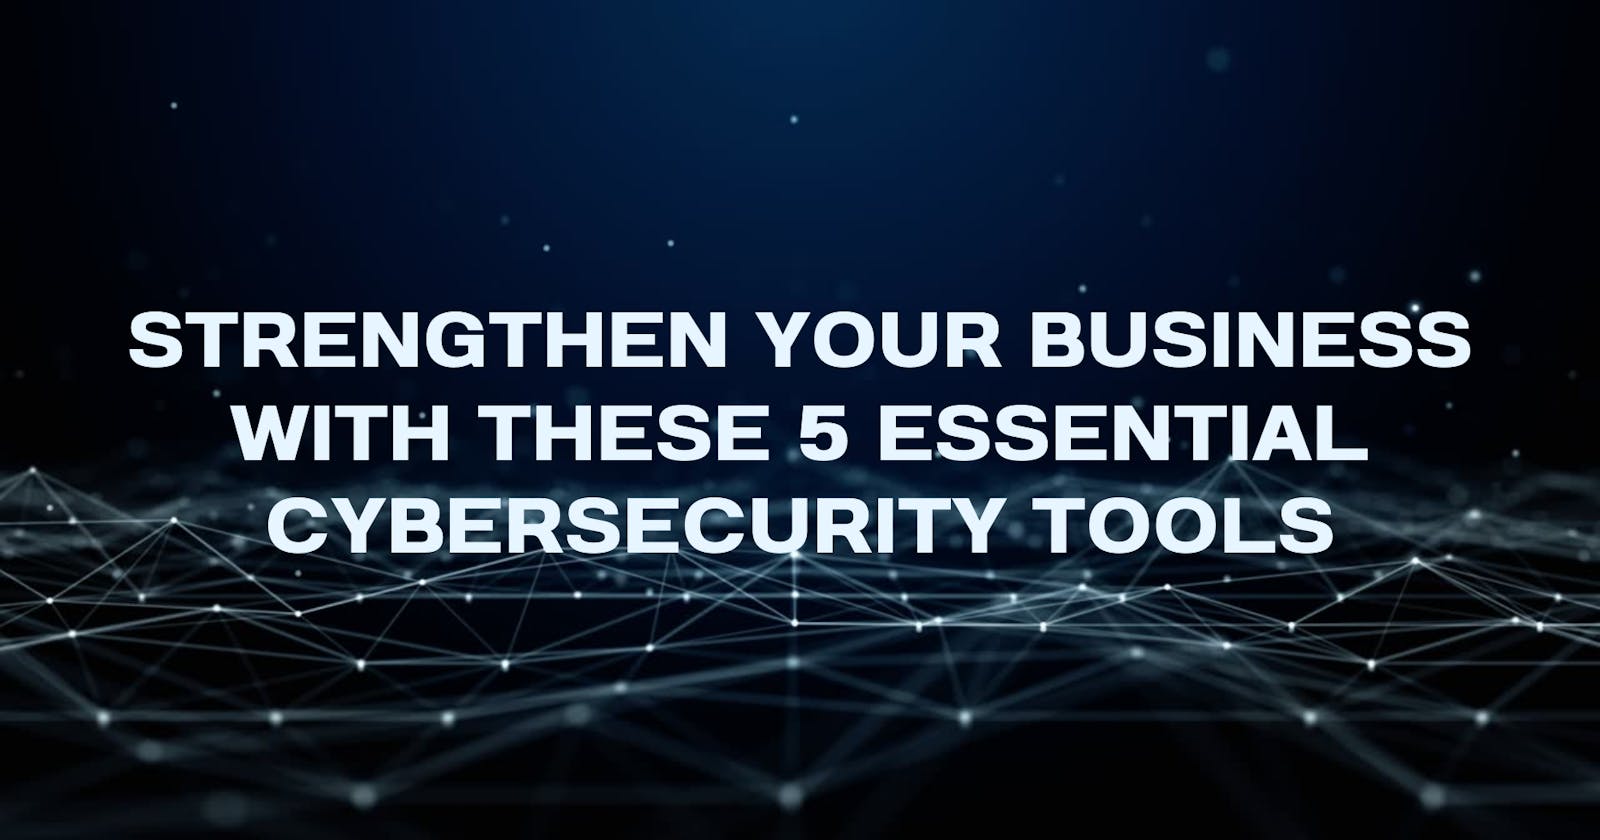 Strengthen Your Business with These 5 Essential Cybersecurity Tools